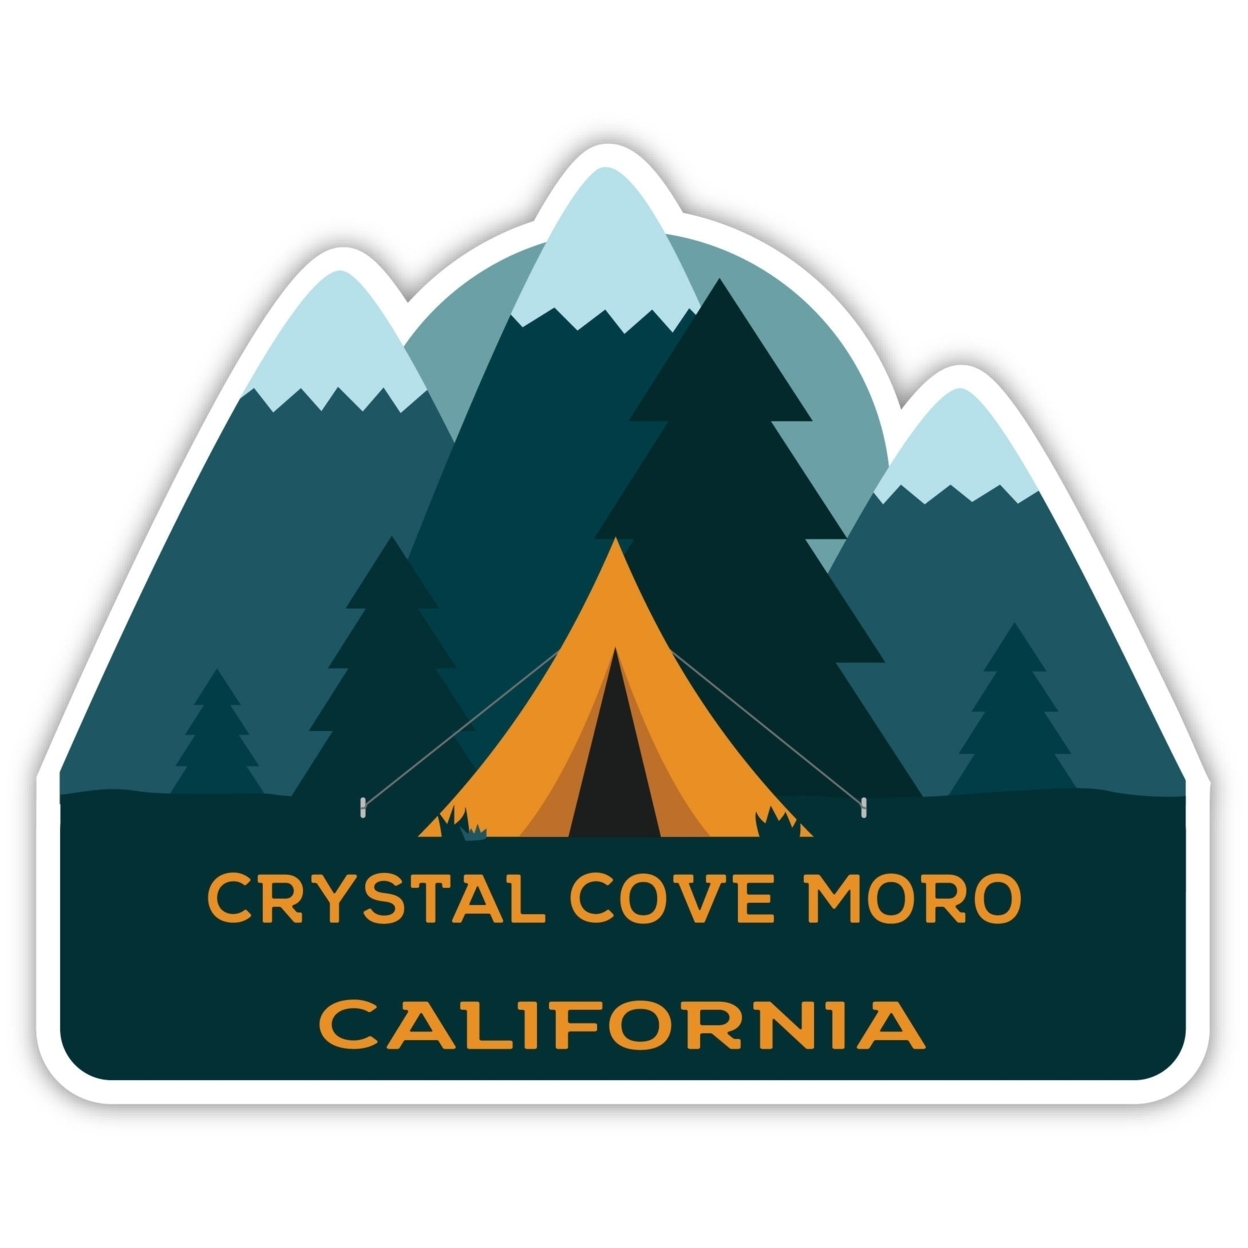 Crystal Cove Moro California Souvenir Decorative Stickers (Choose Theme And Size) - 4-Pack, 12-Inch, Bear